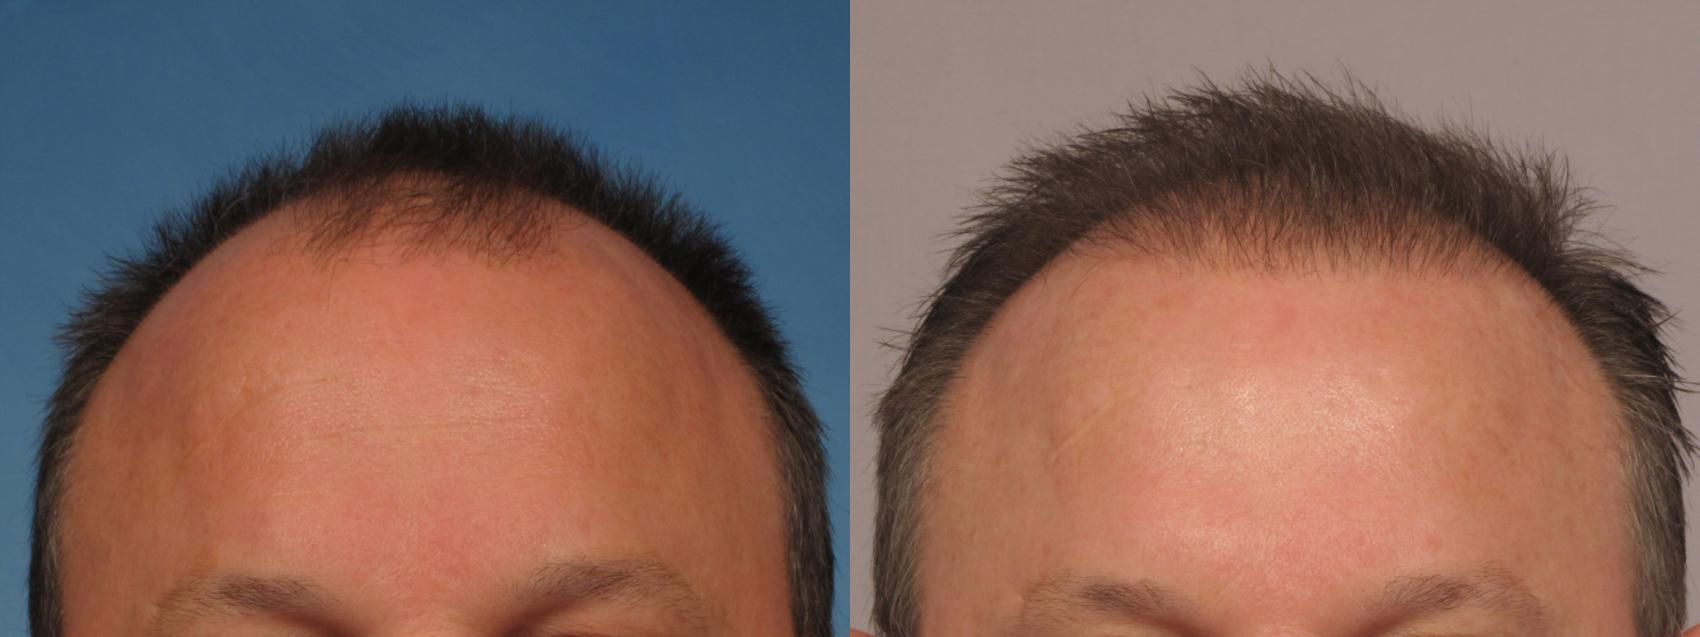 Pre-Treatment Frontal View of NeoGraft Patient by Dr. Kent Hasen